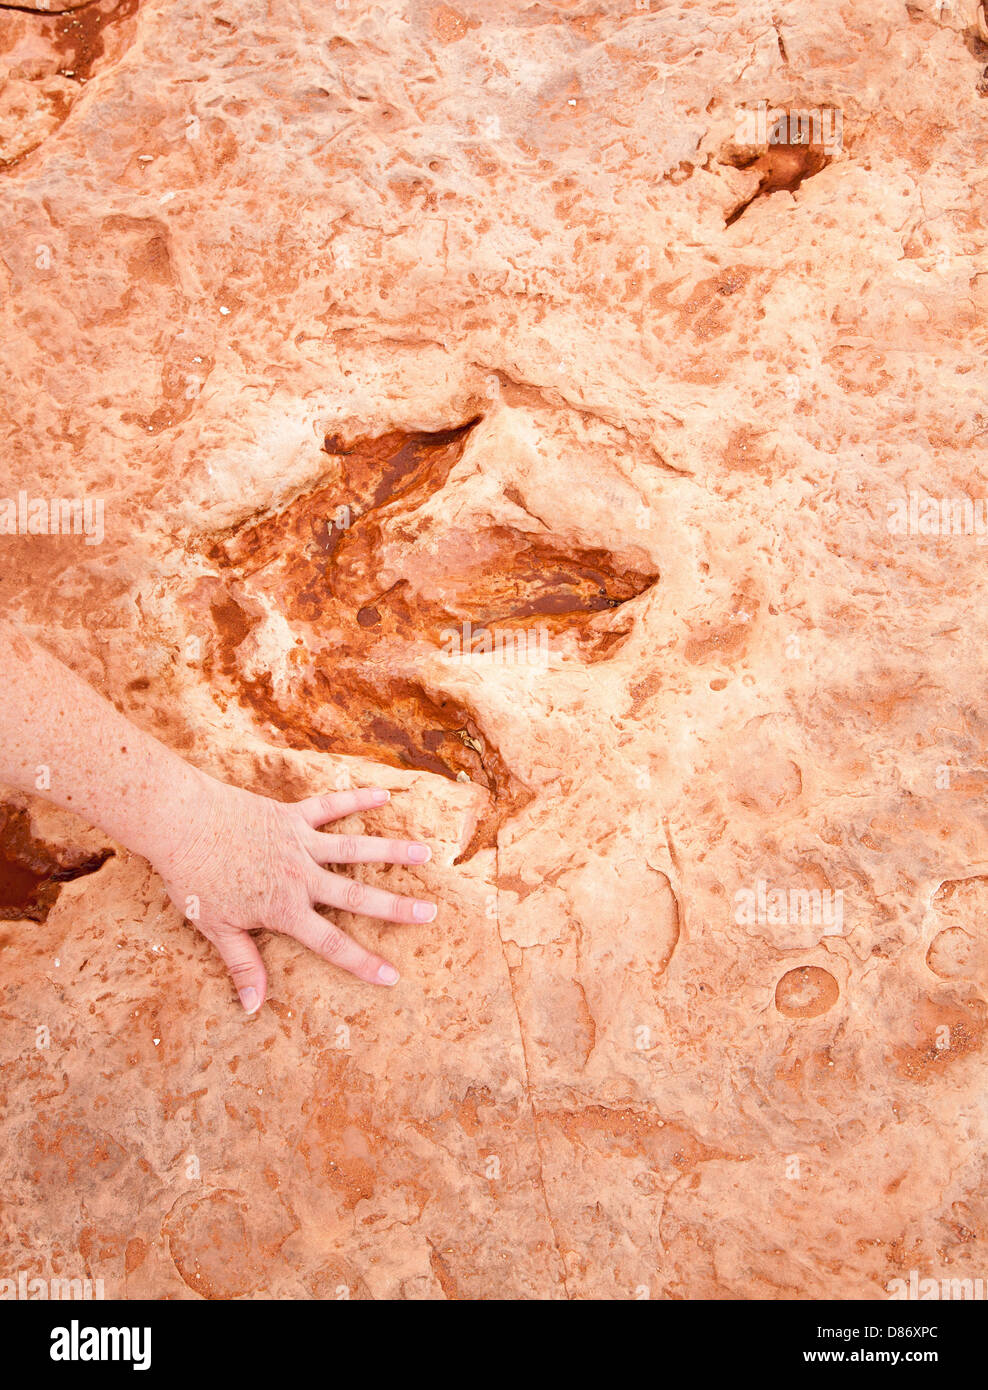 dinosaur footprint with a woman's hand alongside to provide scale in the location of Tuba City Arizona.. Stock Photo